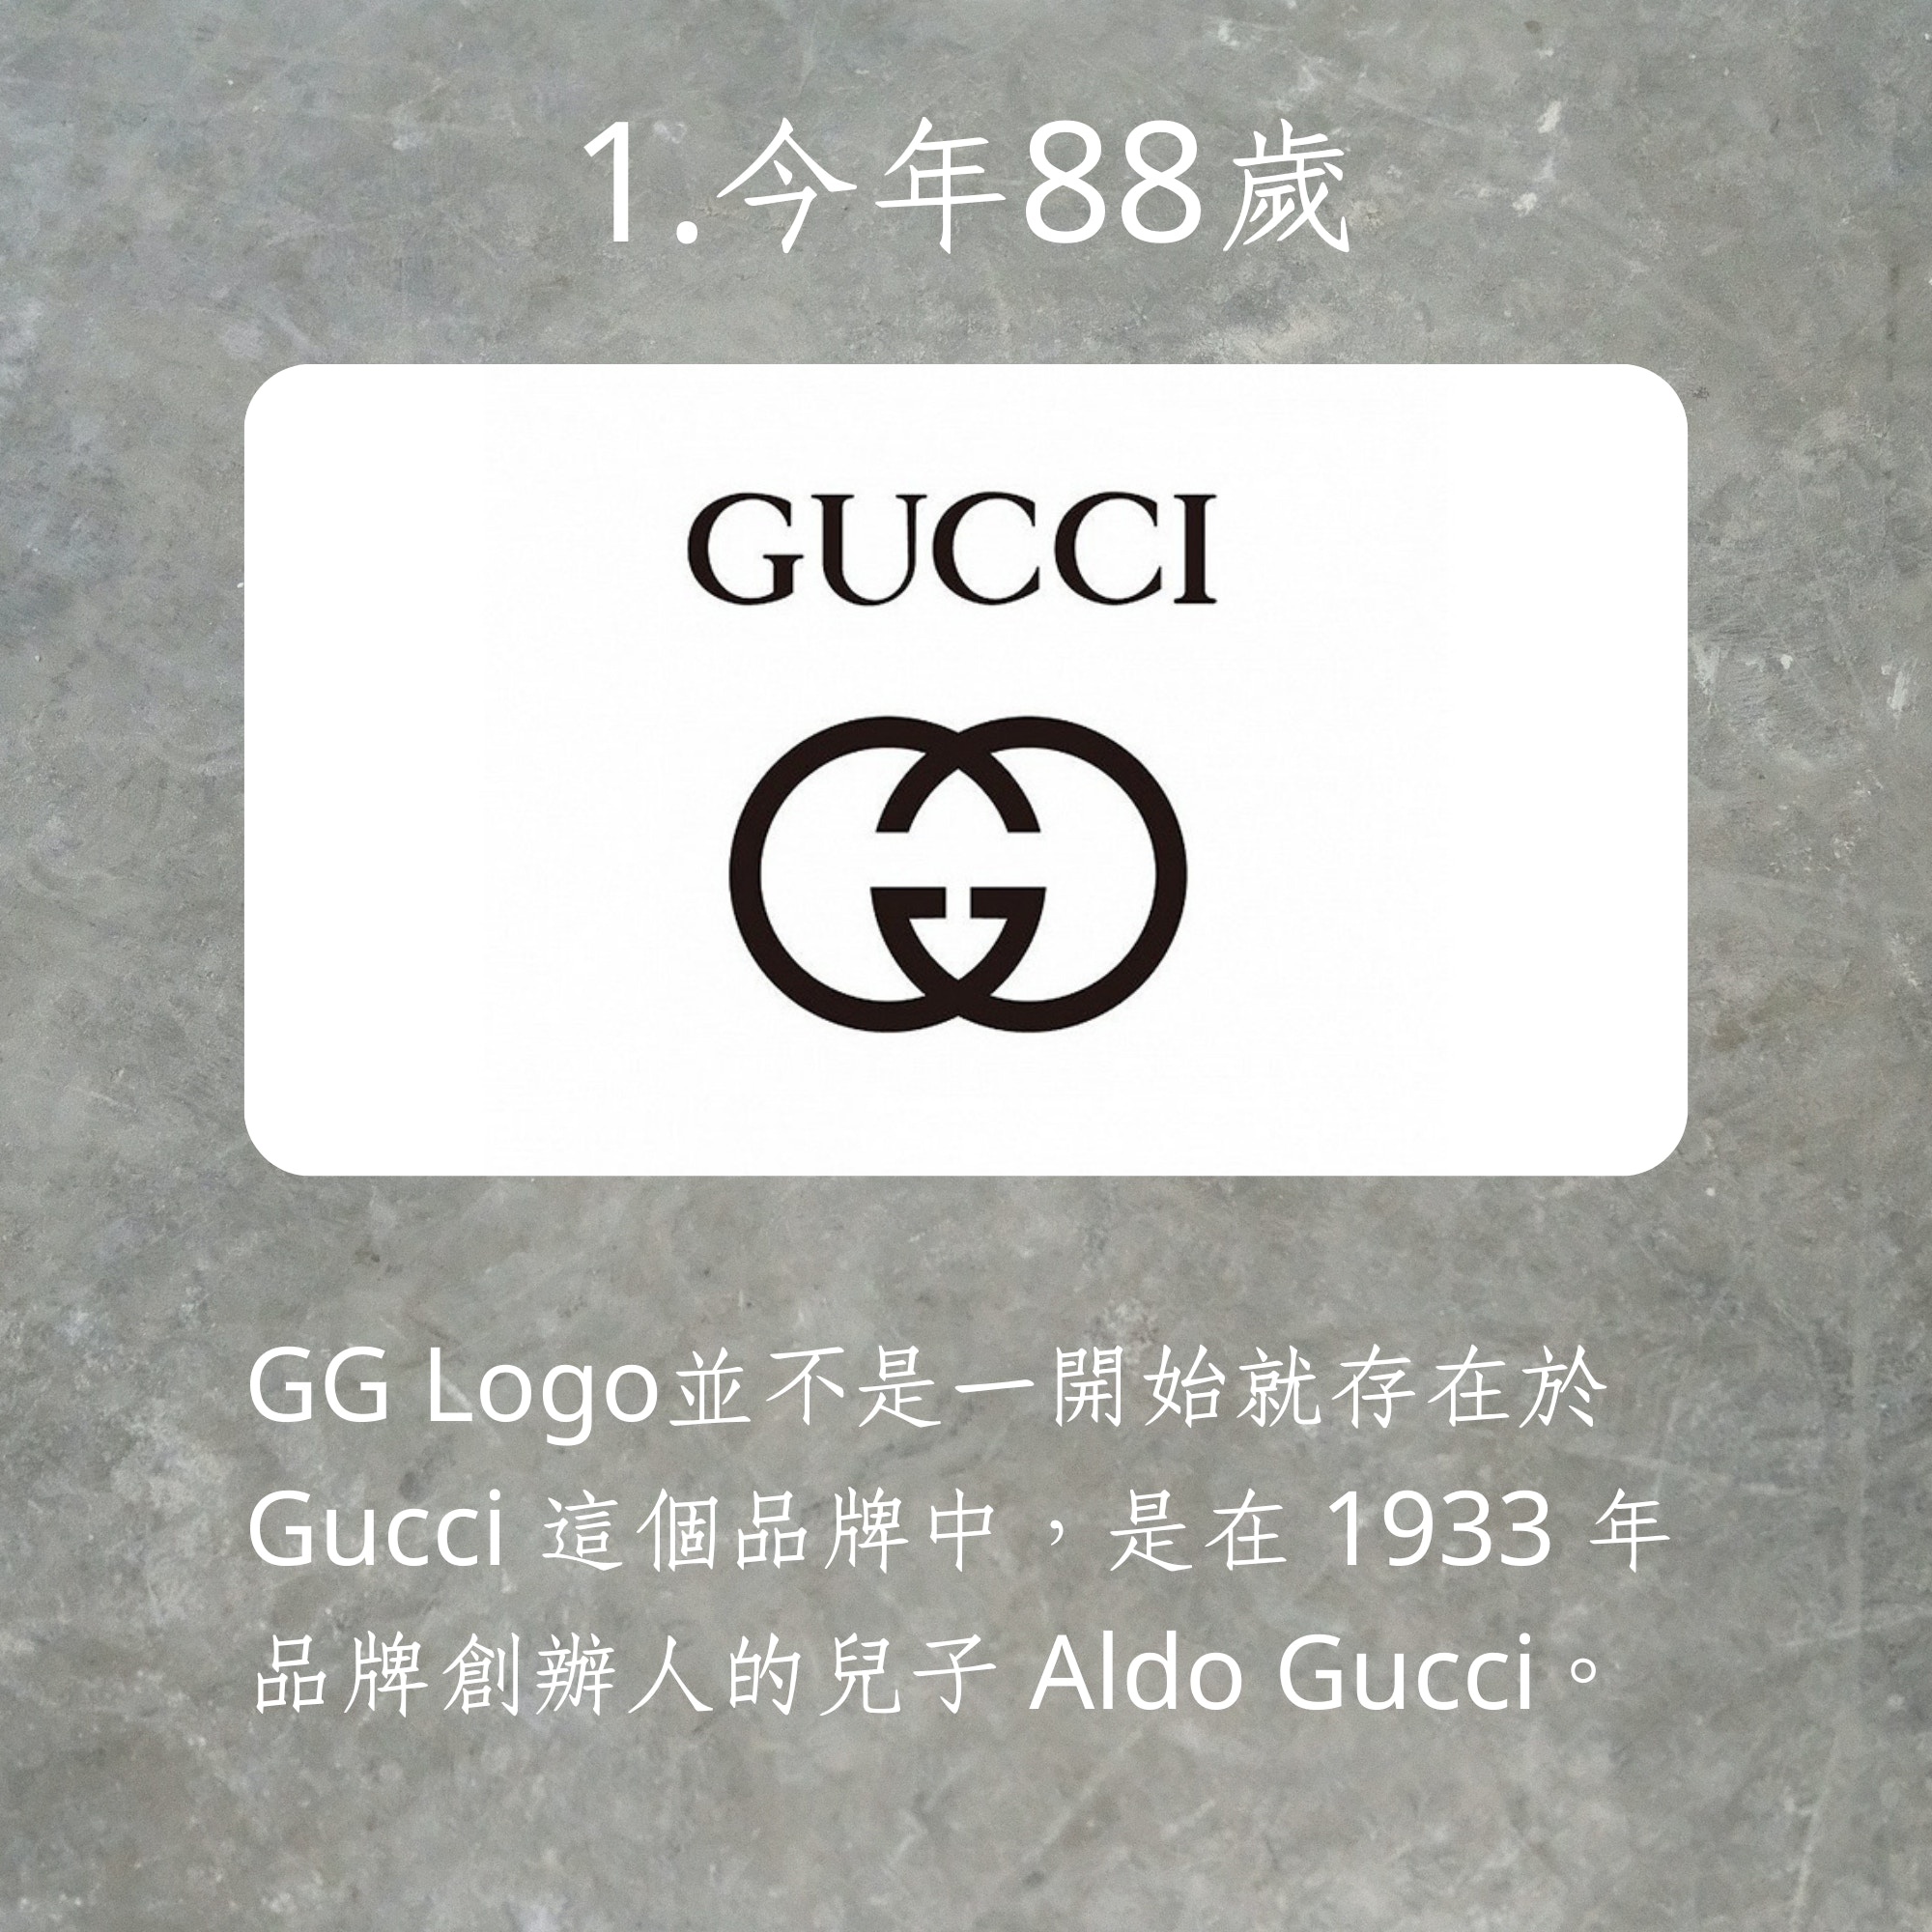 Brown And Gold Gucci Decal Sticker 09, 58% OFF